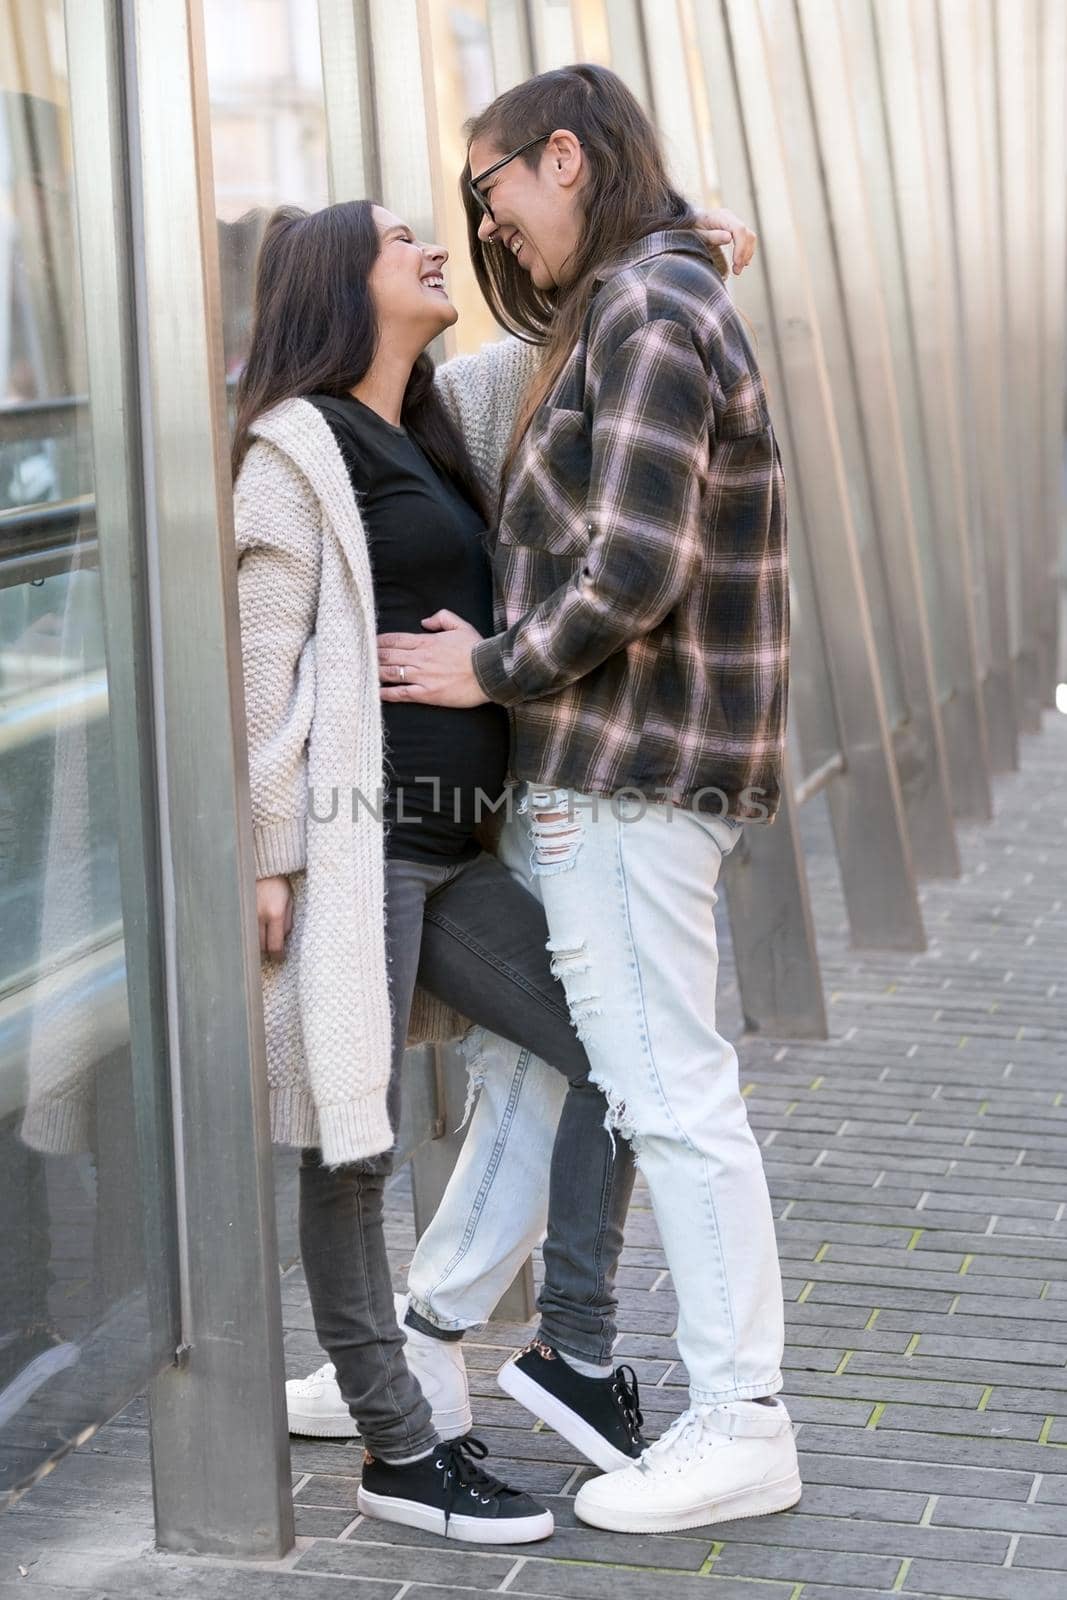 Young affectionate pregnant lesbian couple standing outdoors in city. High quality photo.